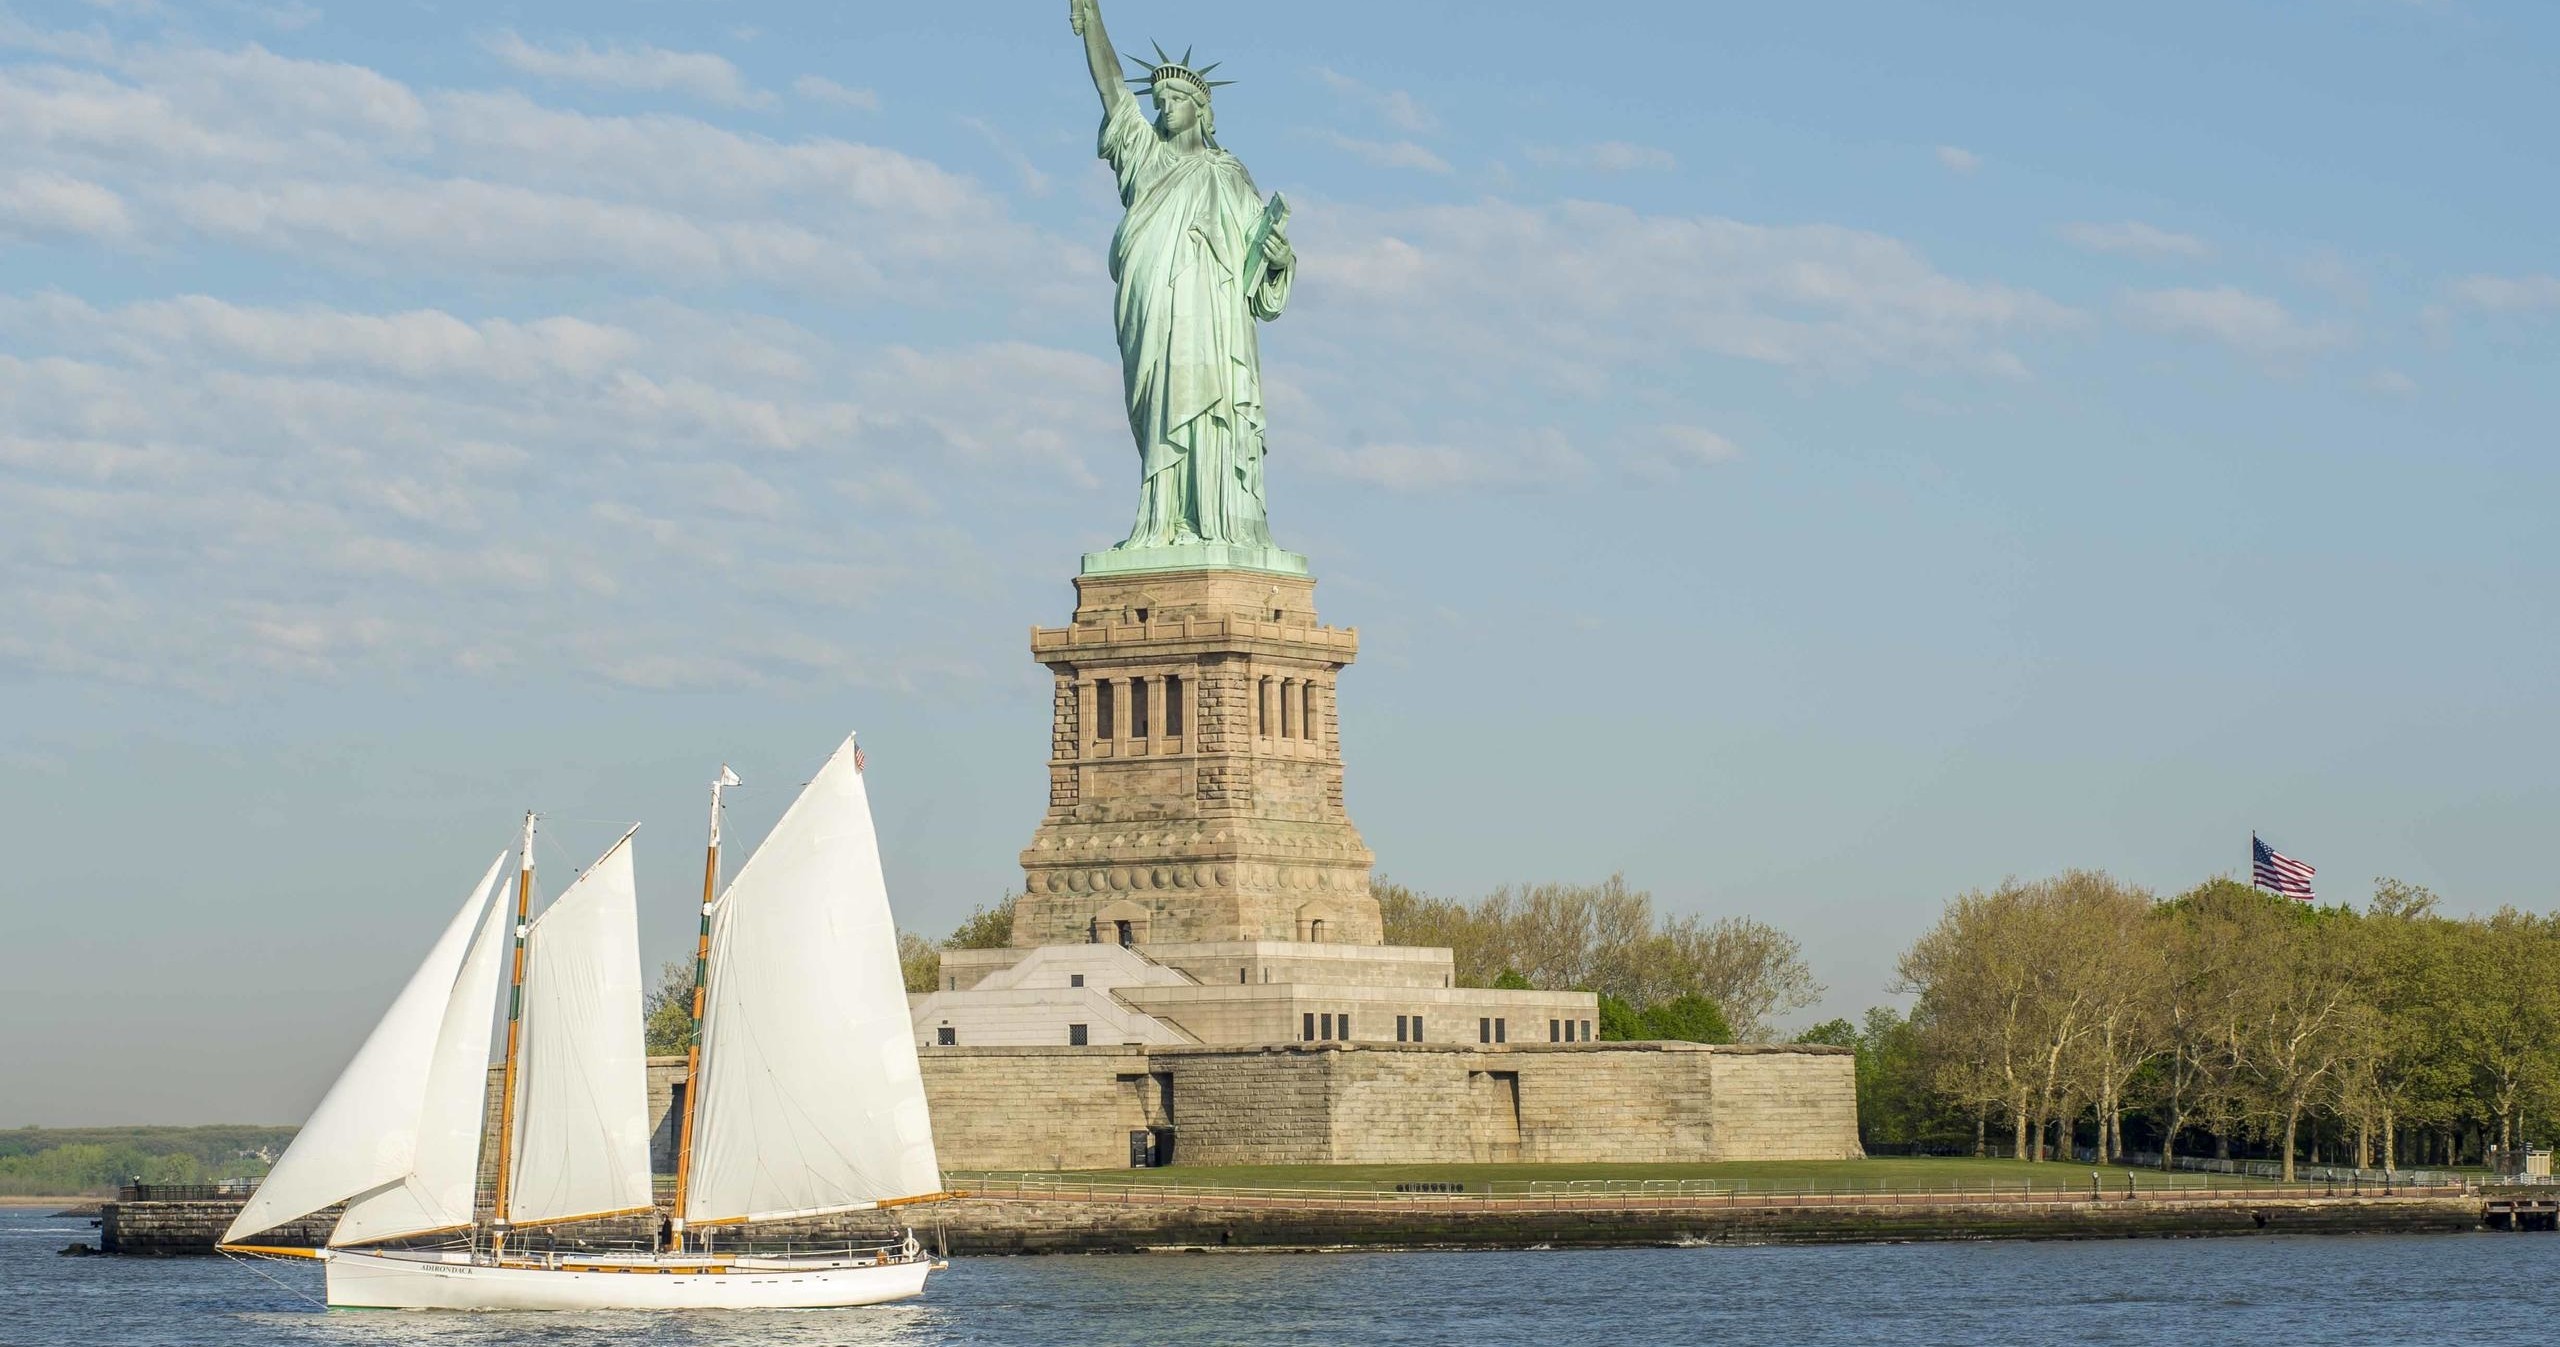 Boat Tour to the Statue of Liberty